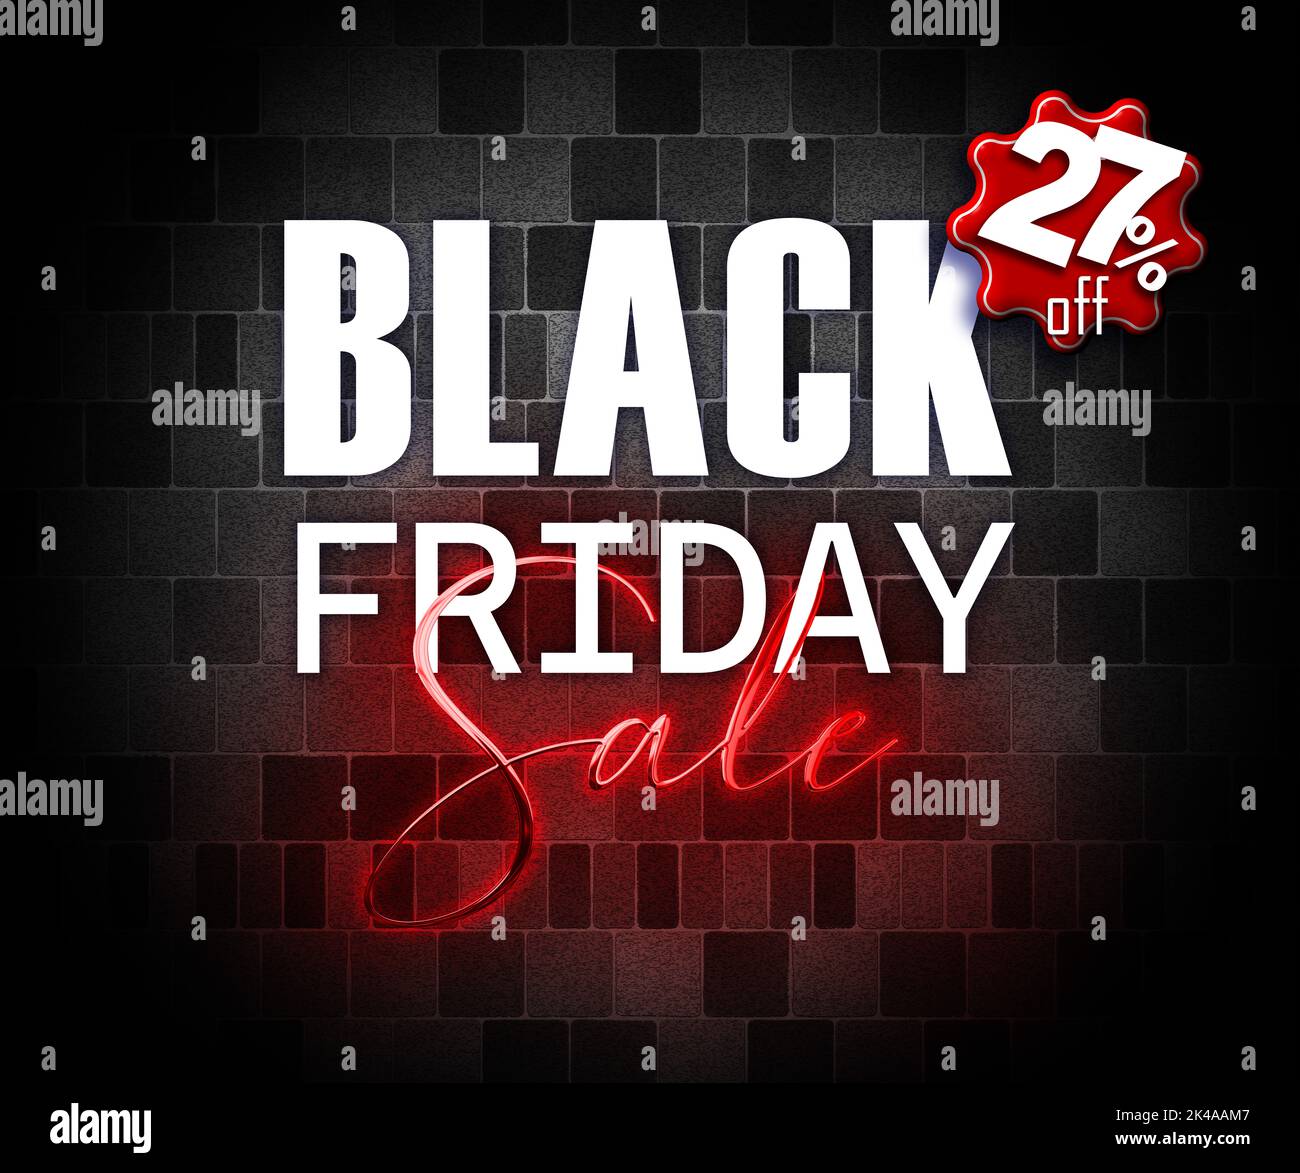 illustration with 3d elements black friday promotion banner 27 percent off sales increase Stock Photo